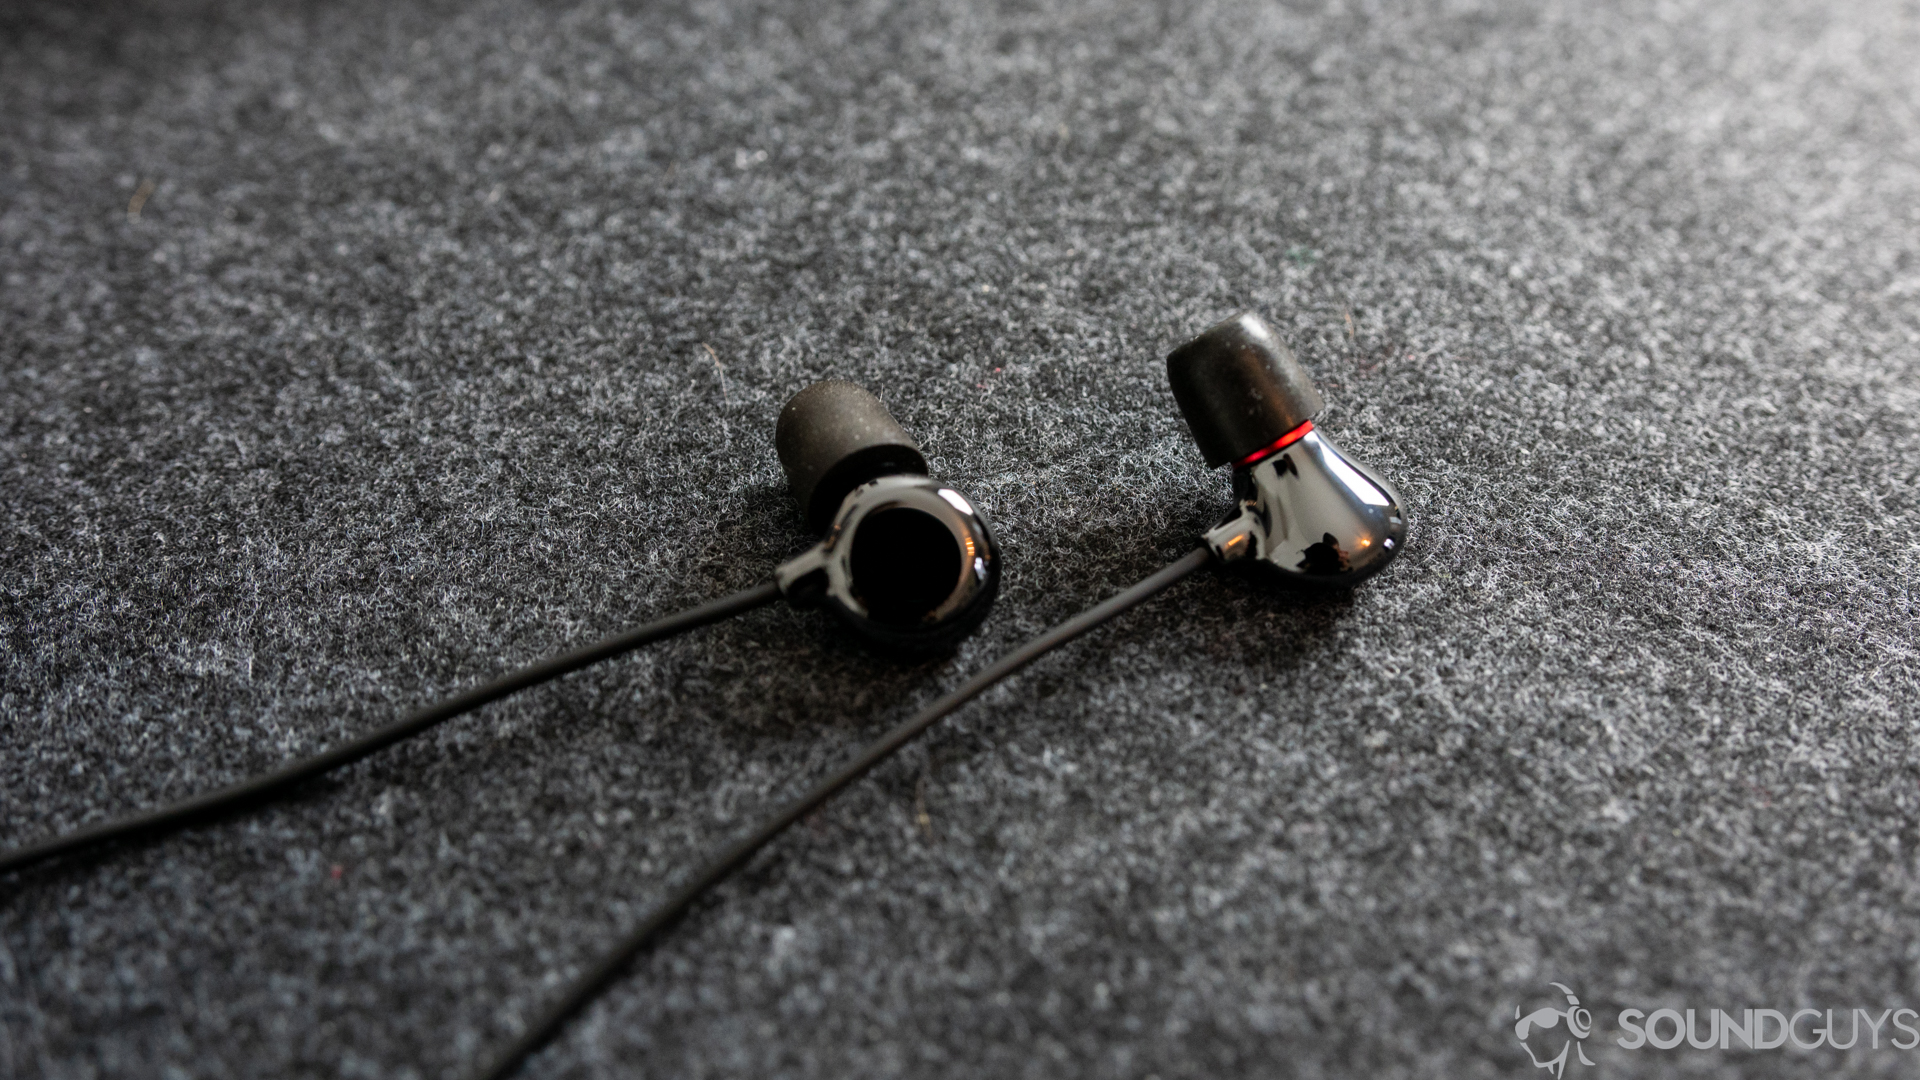 Pictured are the Elise earbuds from ADV.Sound on a desk.